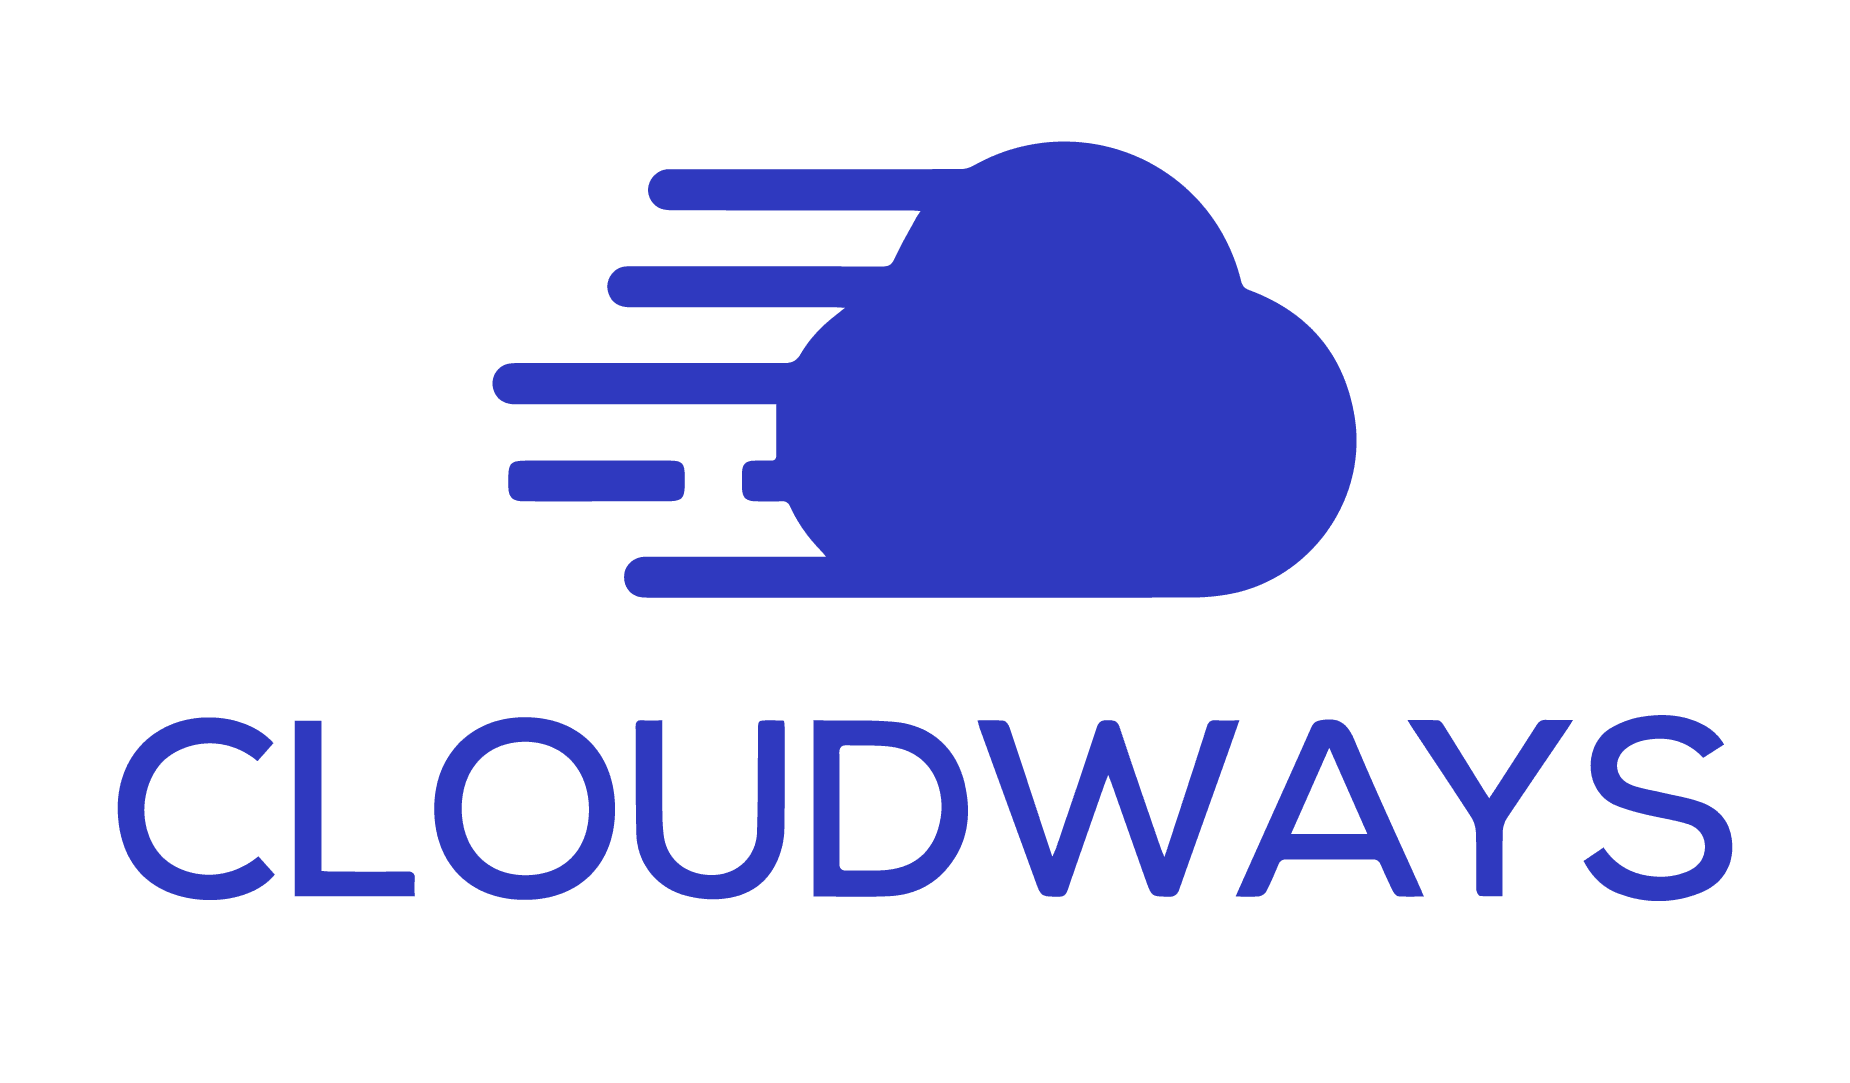 Black Friday offer from Cloudways